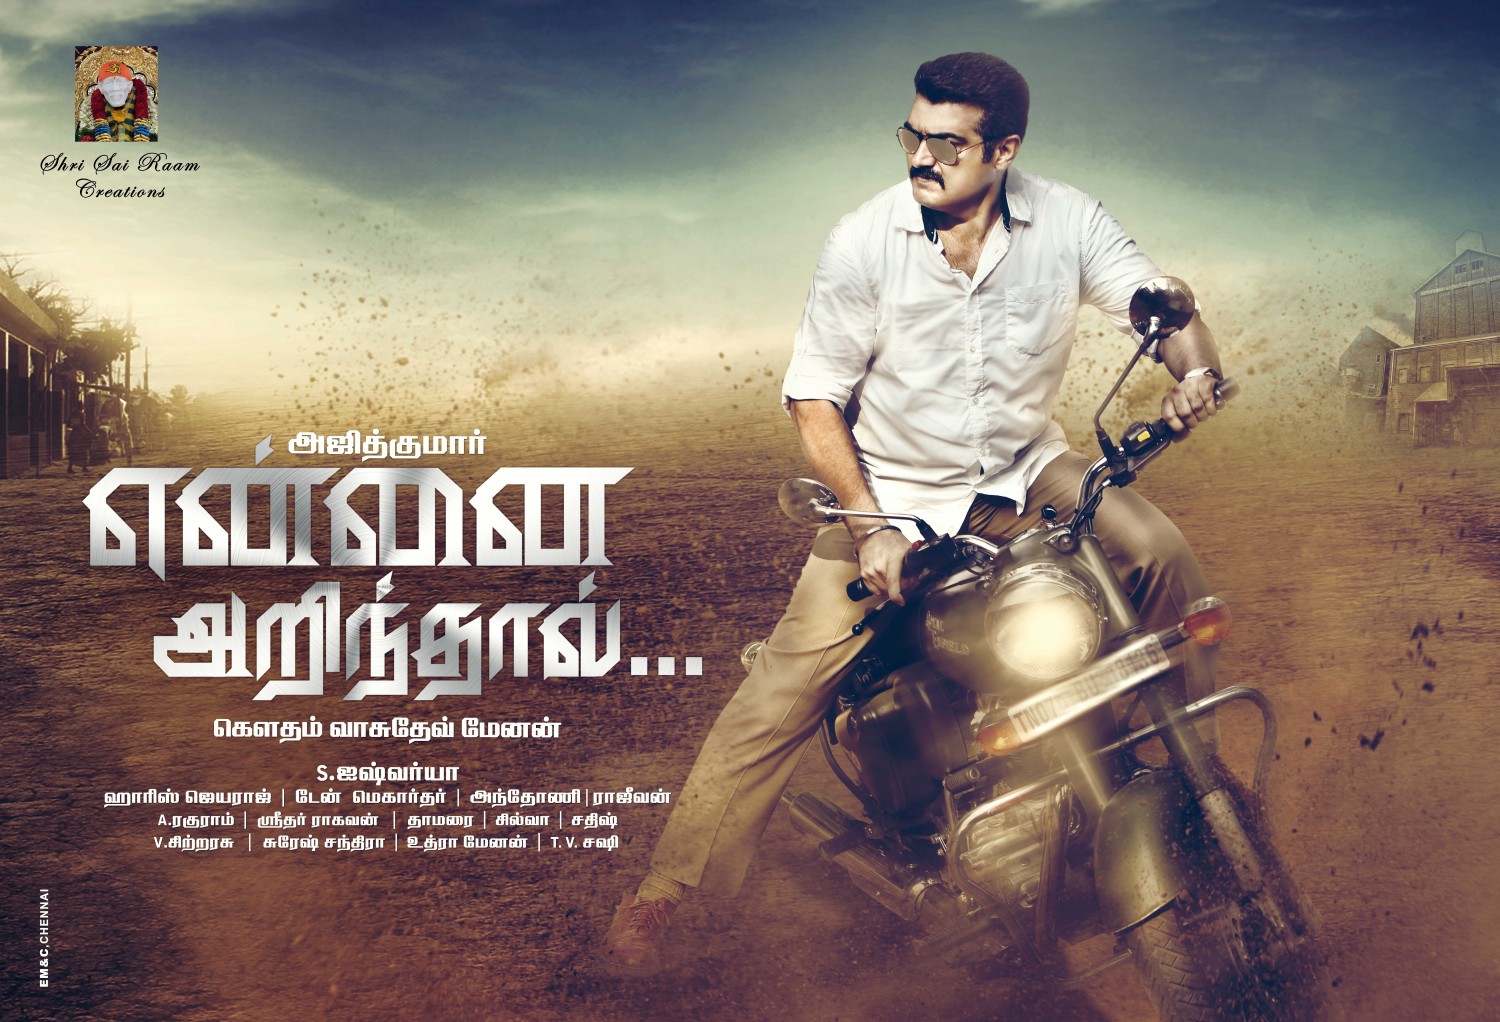 Extra Large Movie Poster Image for Yennai Arindhaal... (#5 of 11)